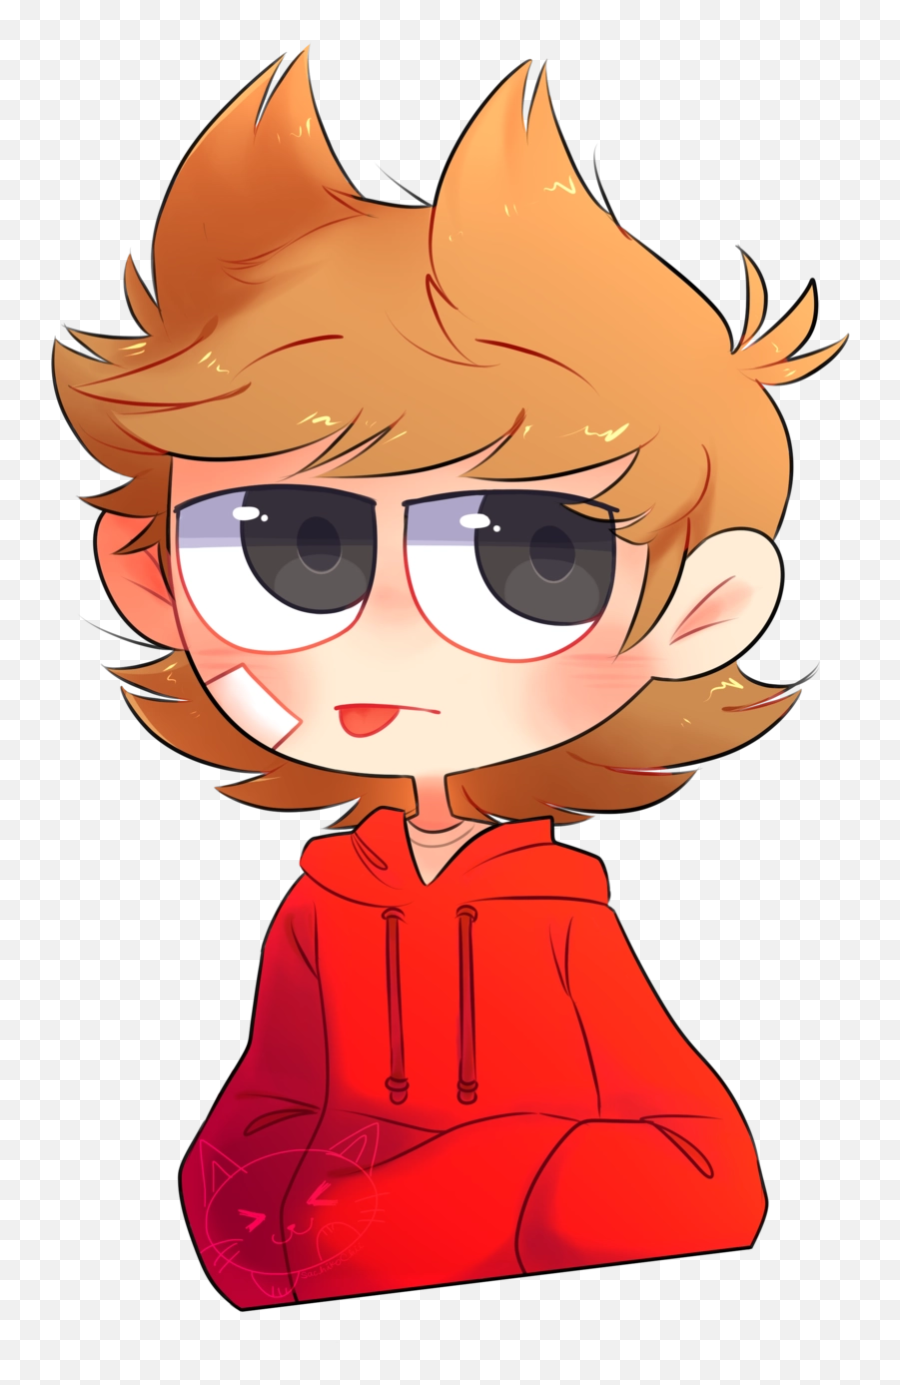 Download Free Png Image - Eddsworld Bad Apple Tordpng Cute Tord,Tord Icon